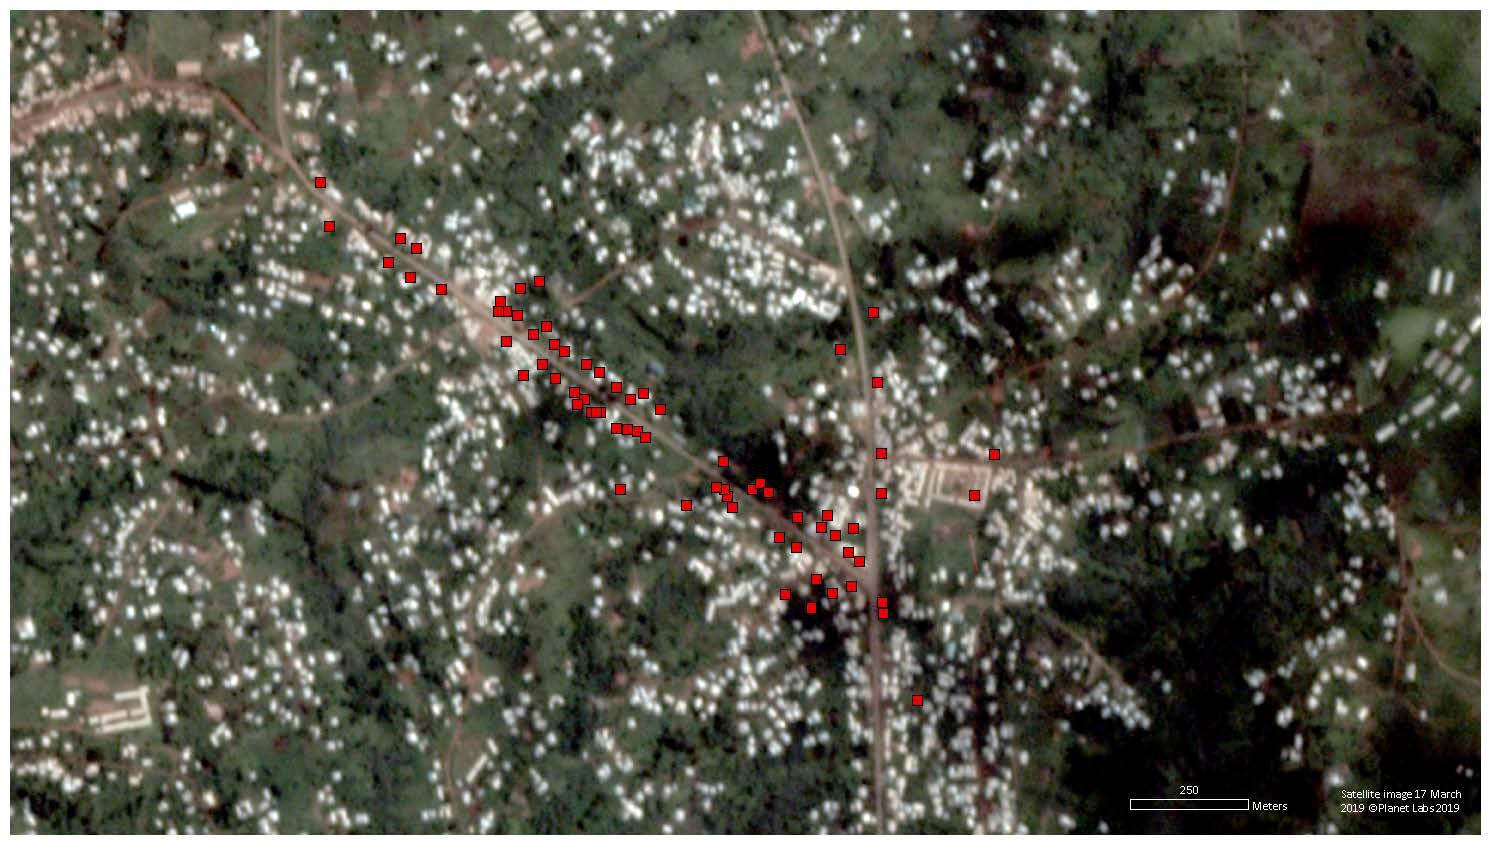 Satellite image showing over 70 buildings affected by fire in Mankon, Cameroon, between May 13 and 17, 2019. Damages reported might be underestimated due to the low resolution of the image.